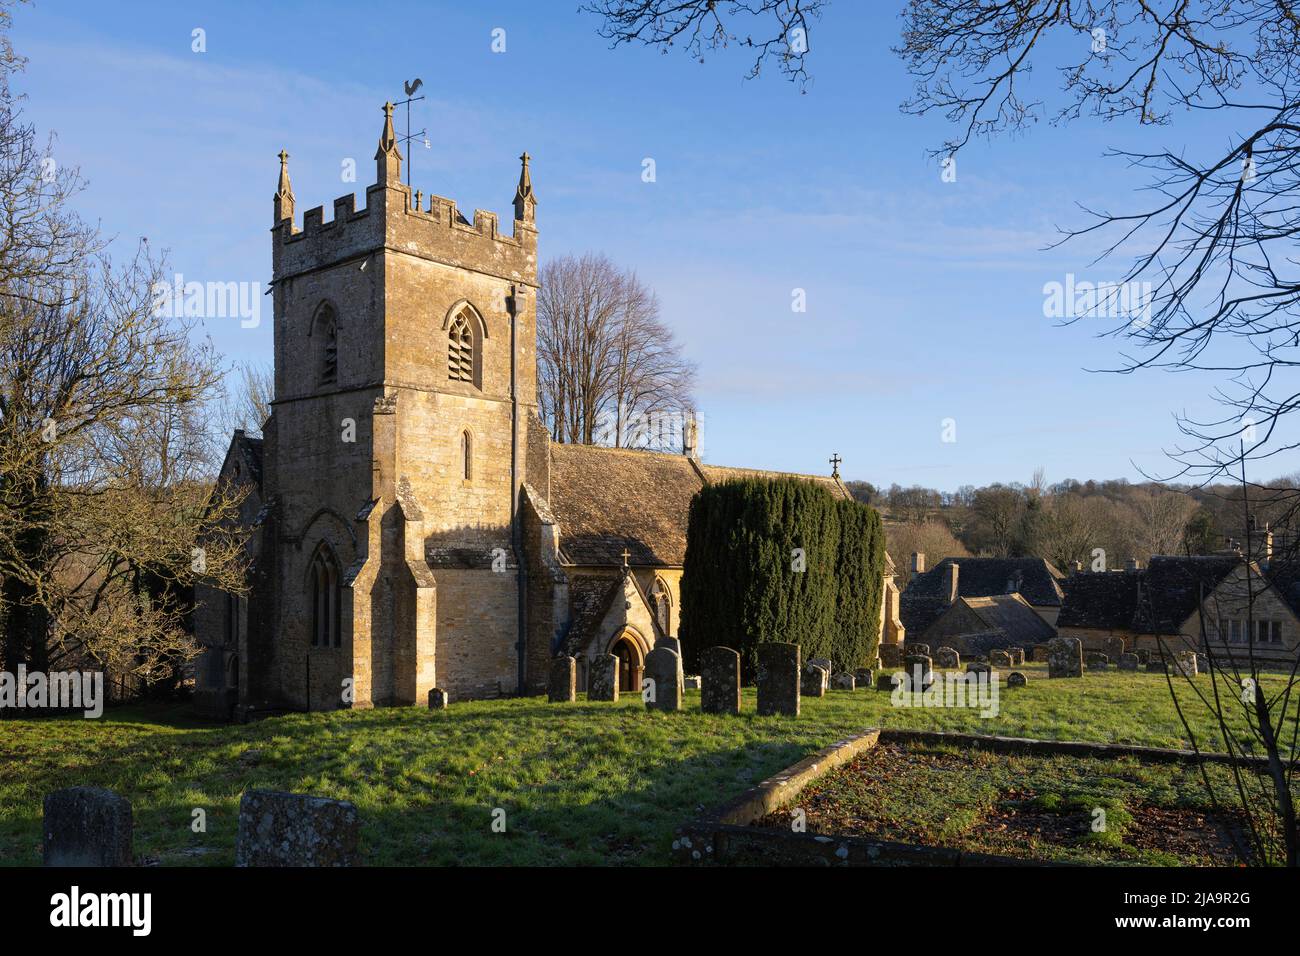 Die Cotswold Kirche in Upper Slaughter, Gloucestershire, England. Stockfoto